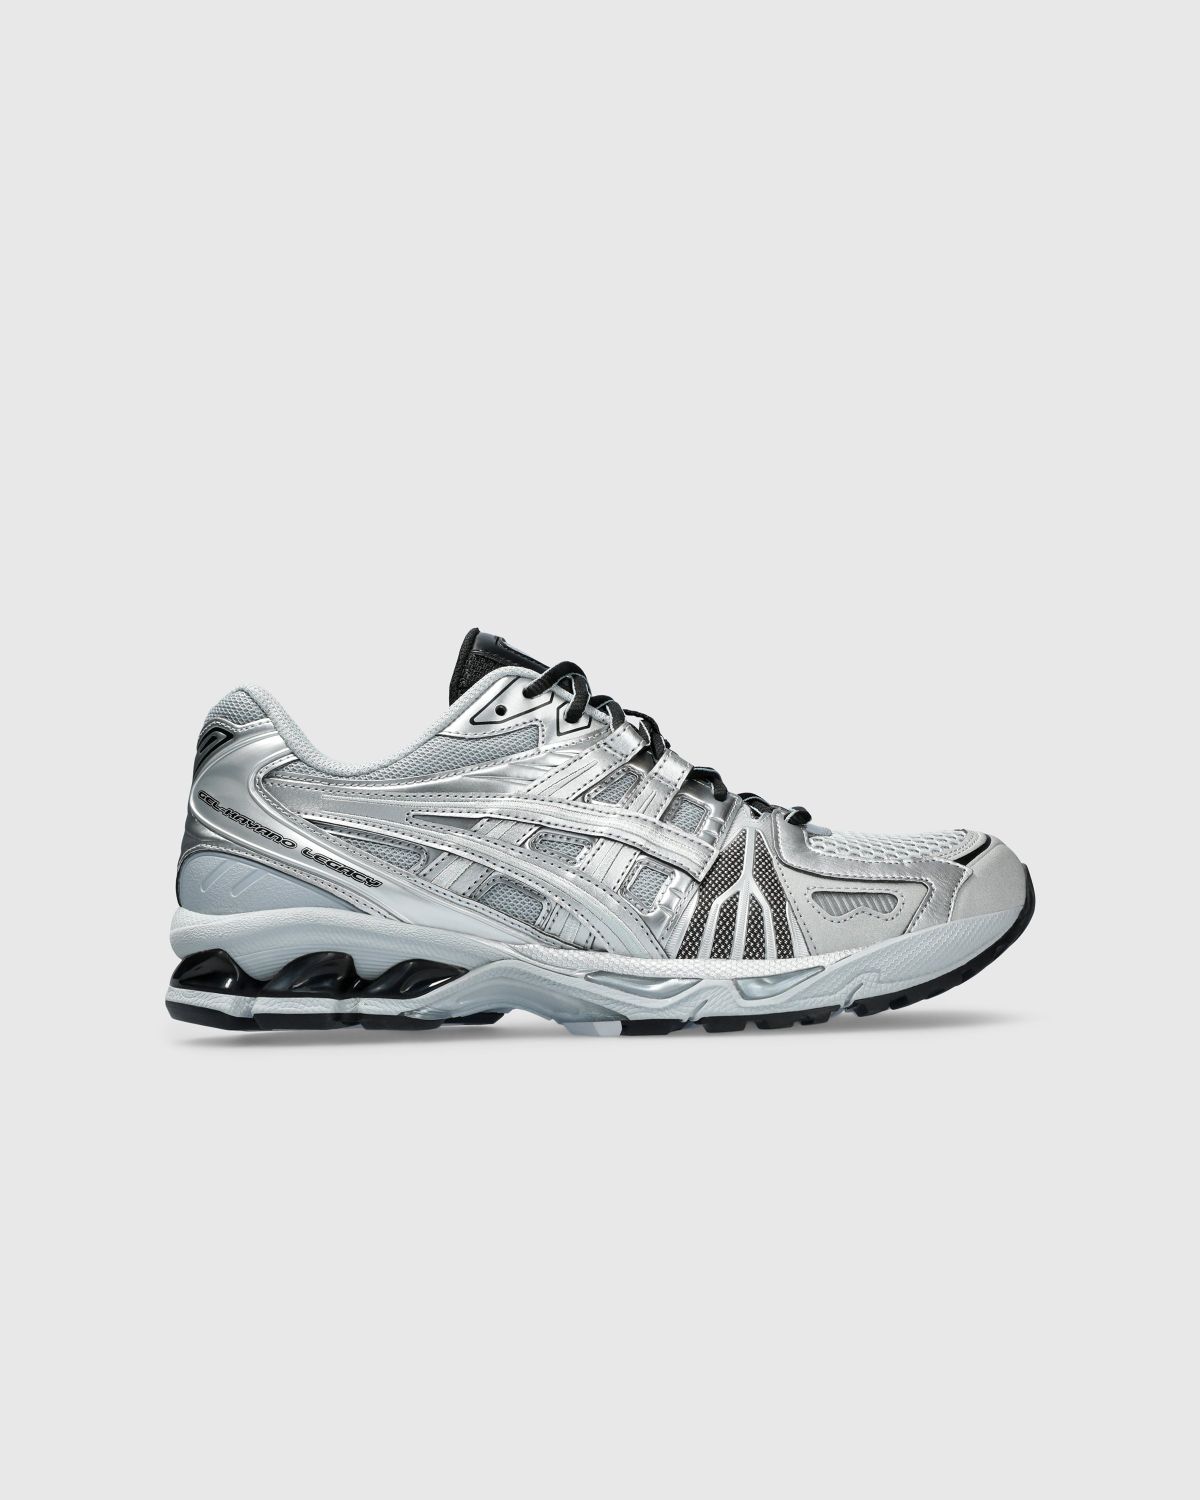 asics – GEL-KAYANO LEGACY Pure Silver - Sneakers - Silver - Image 1